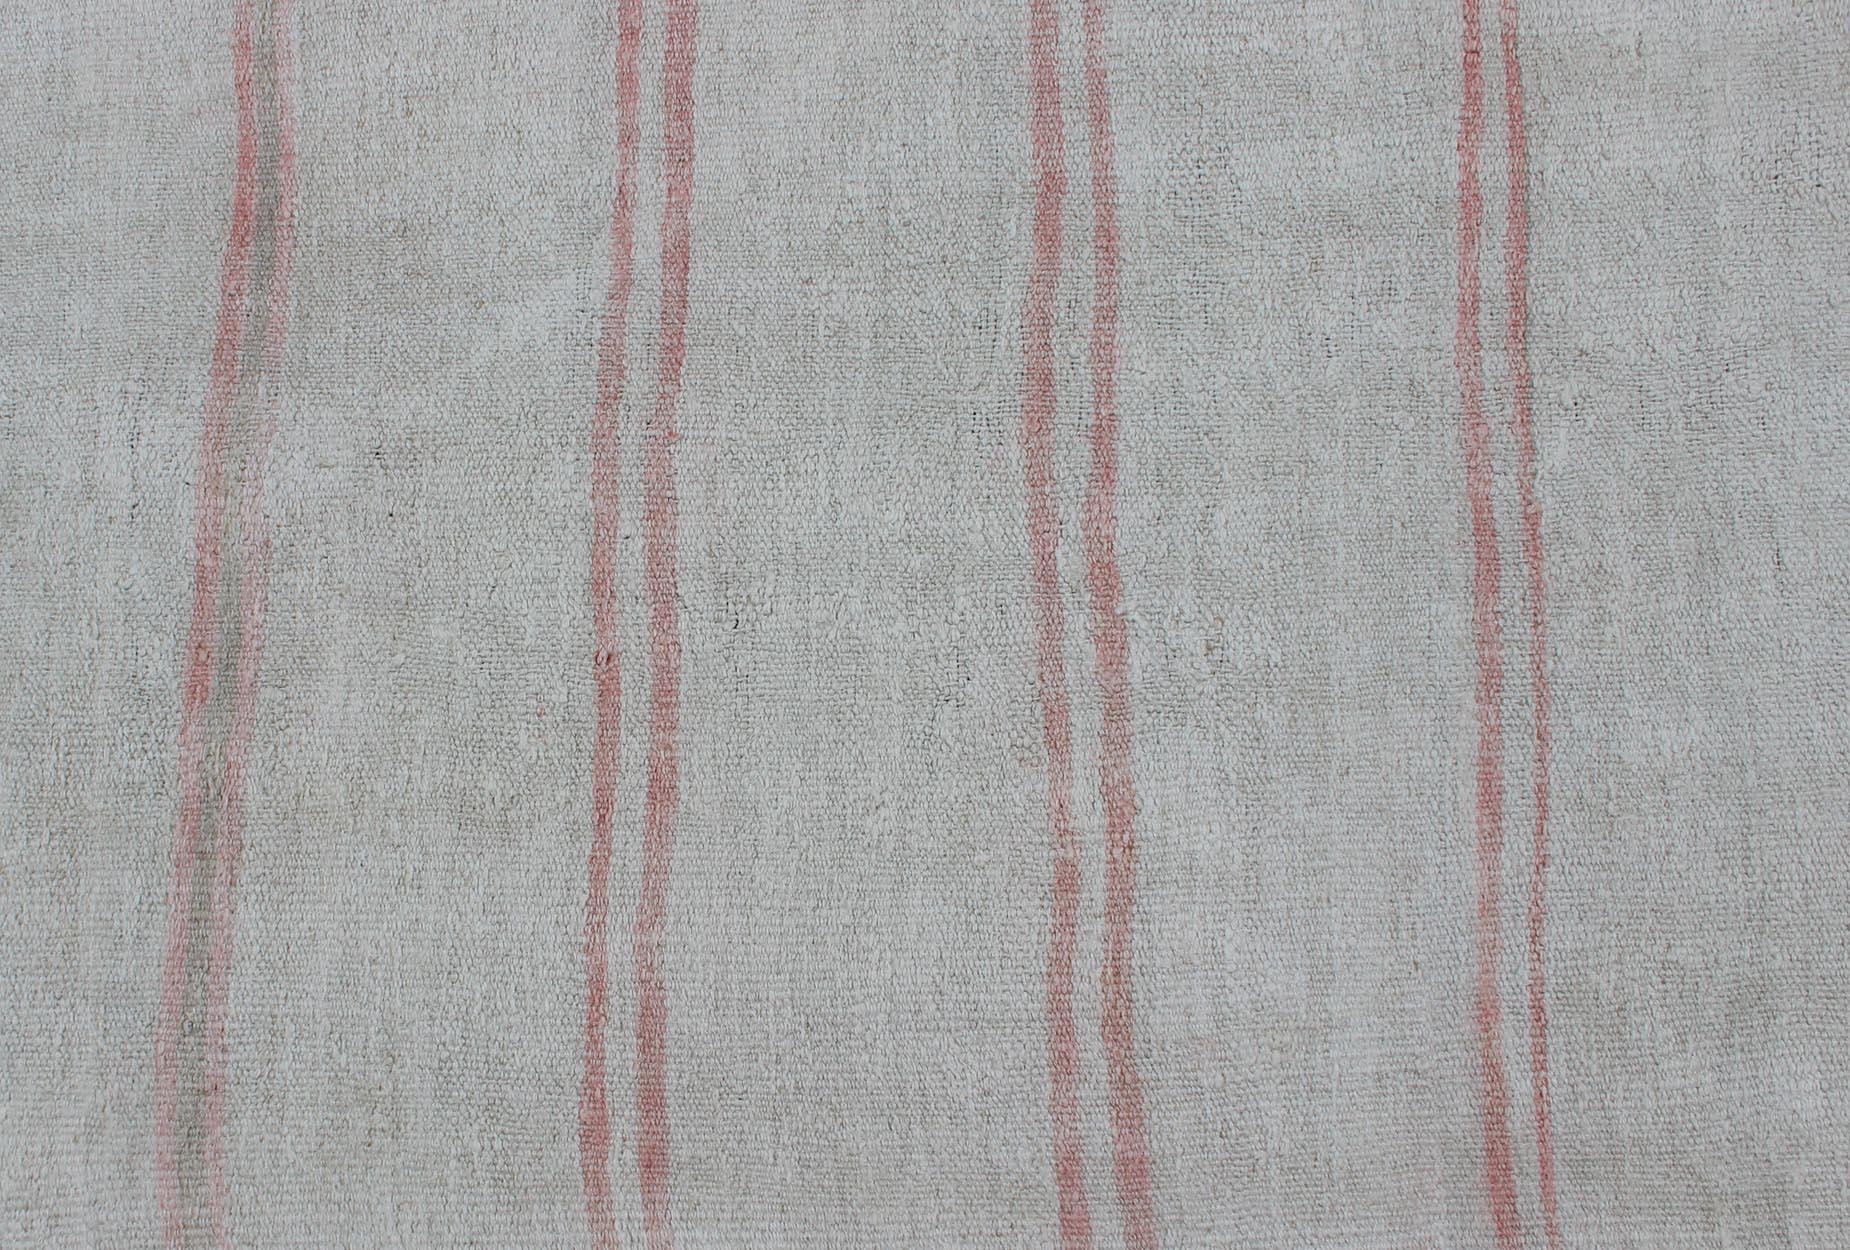 Striped Turkish Vintage Kilim Flat-Weave Rug in Shades of Soft Red and Cream For Sale 1